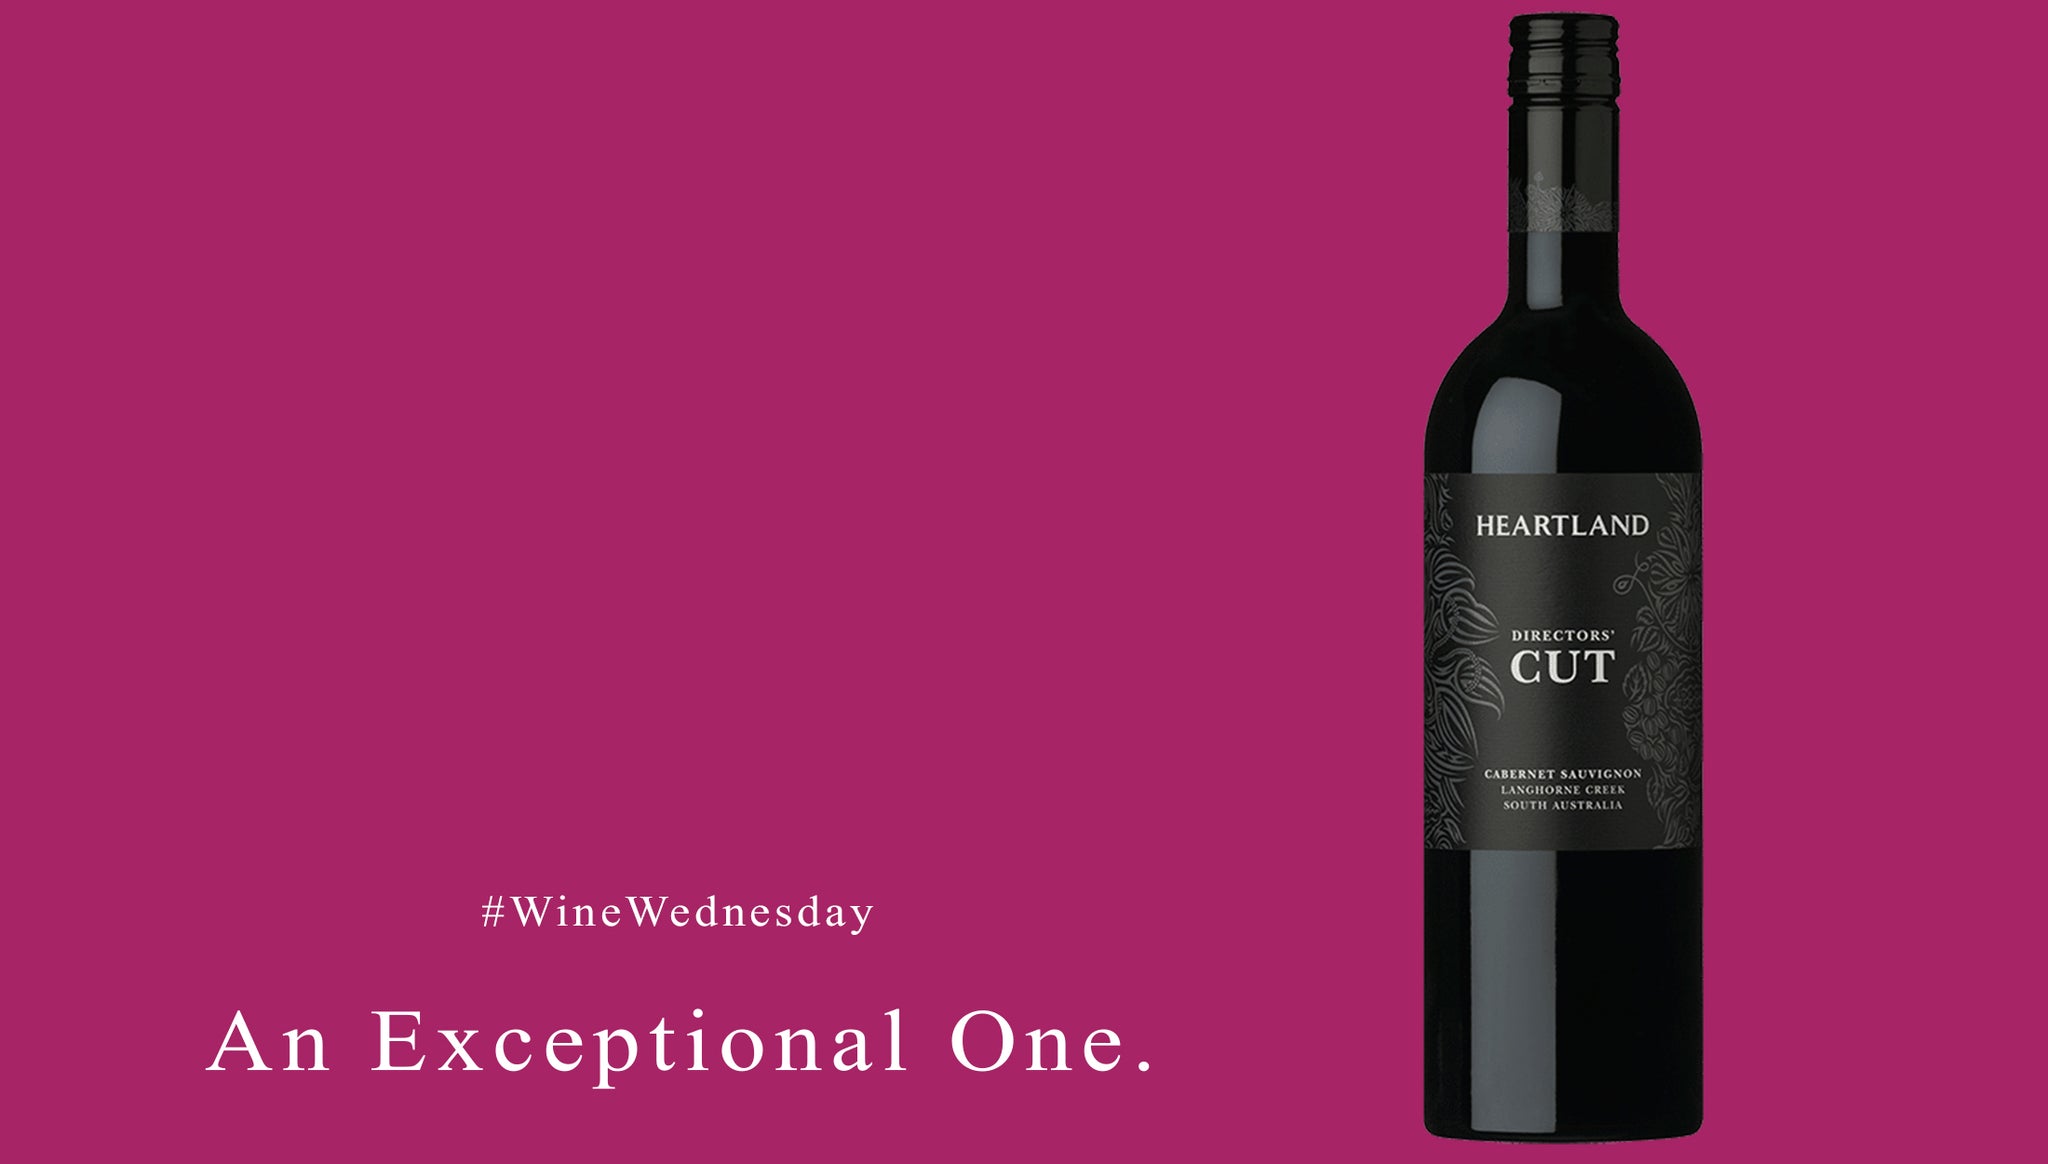 #WINEWEDNESDAY - An Exceptional One